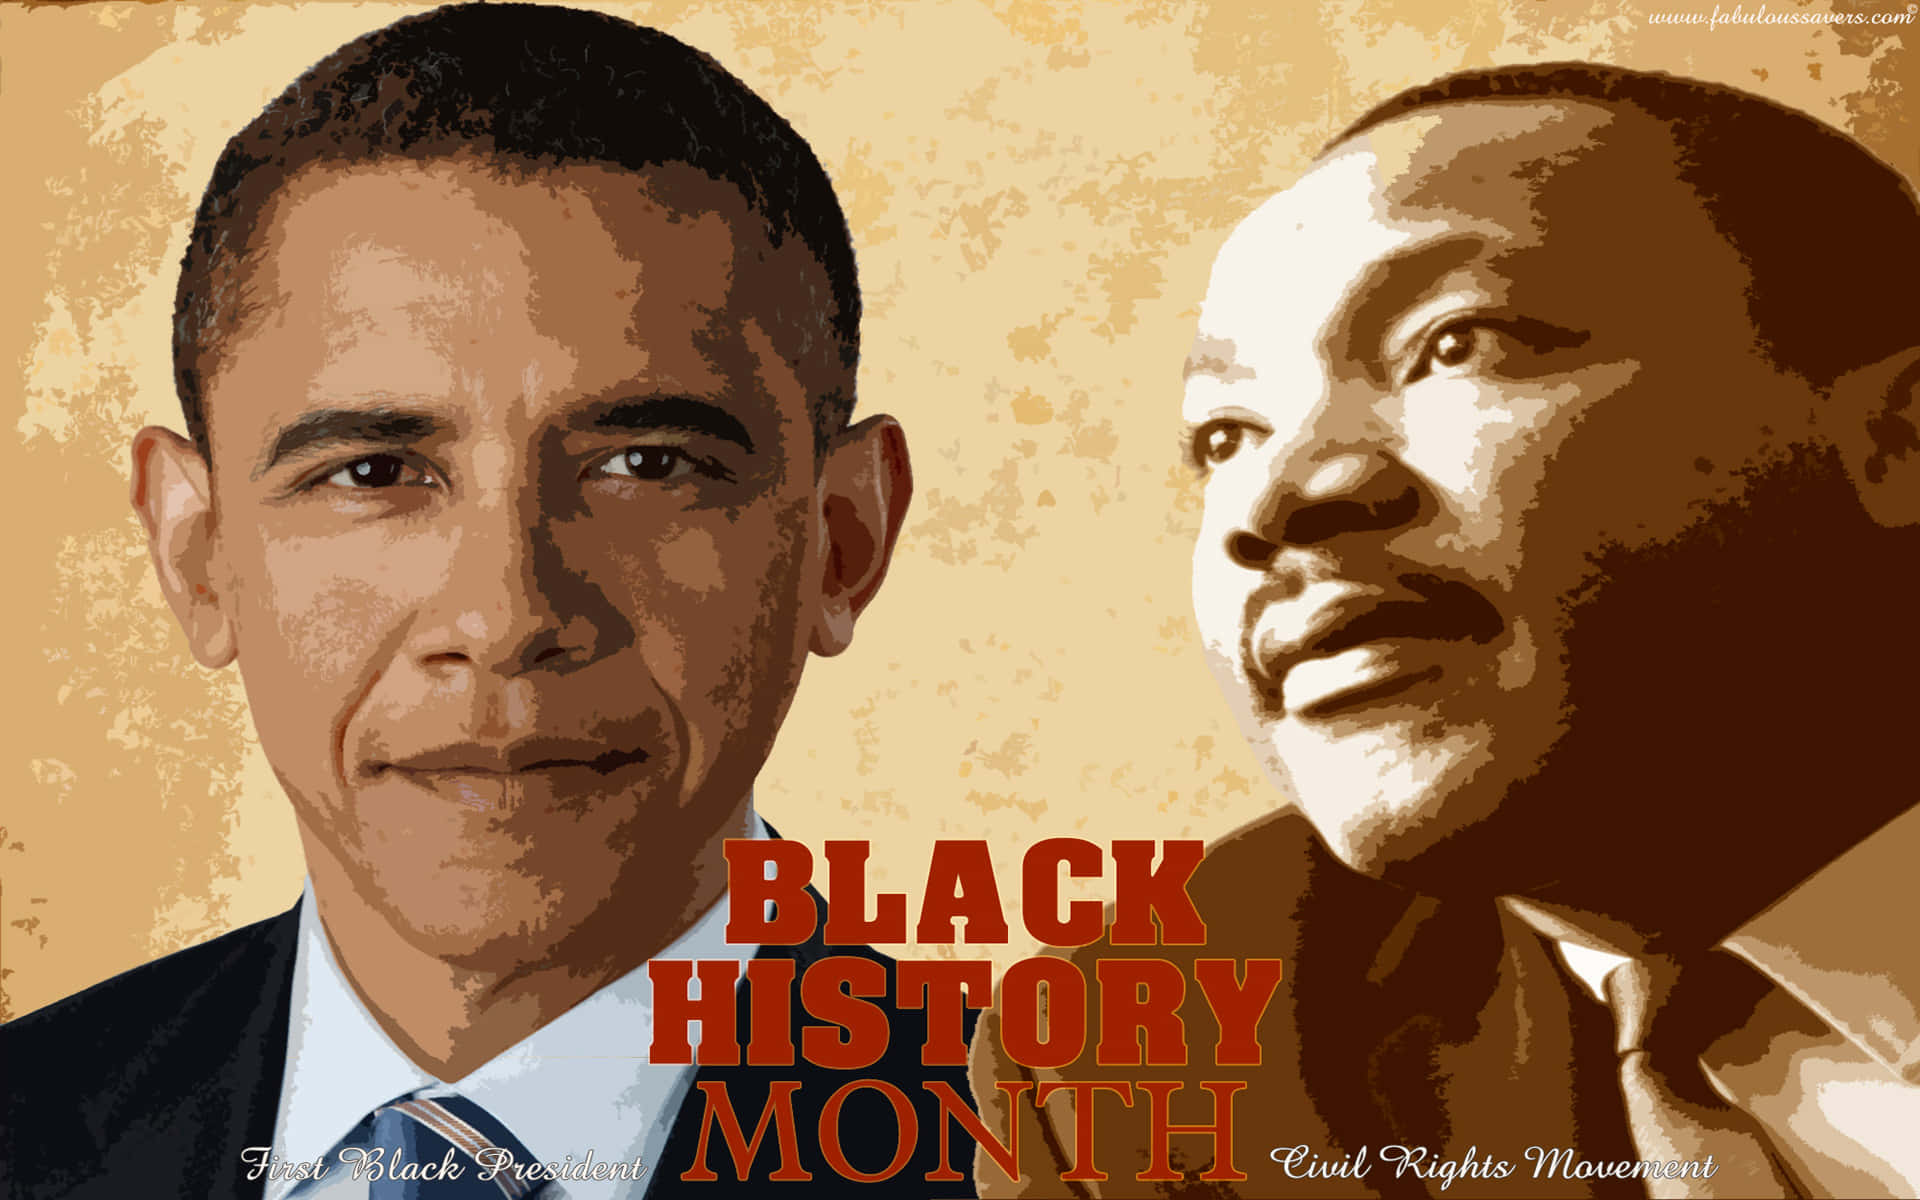 900 Black History Month Photos Stock Photos Pictures  RoyaltyFree Images   iStock